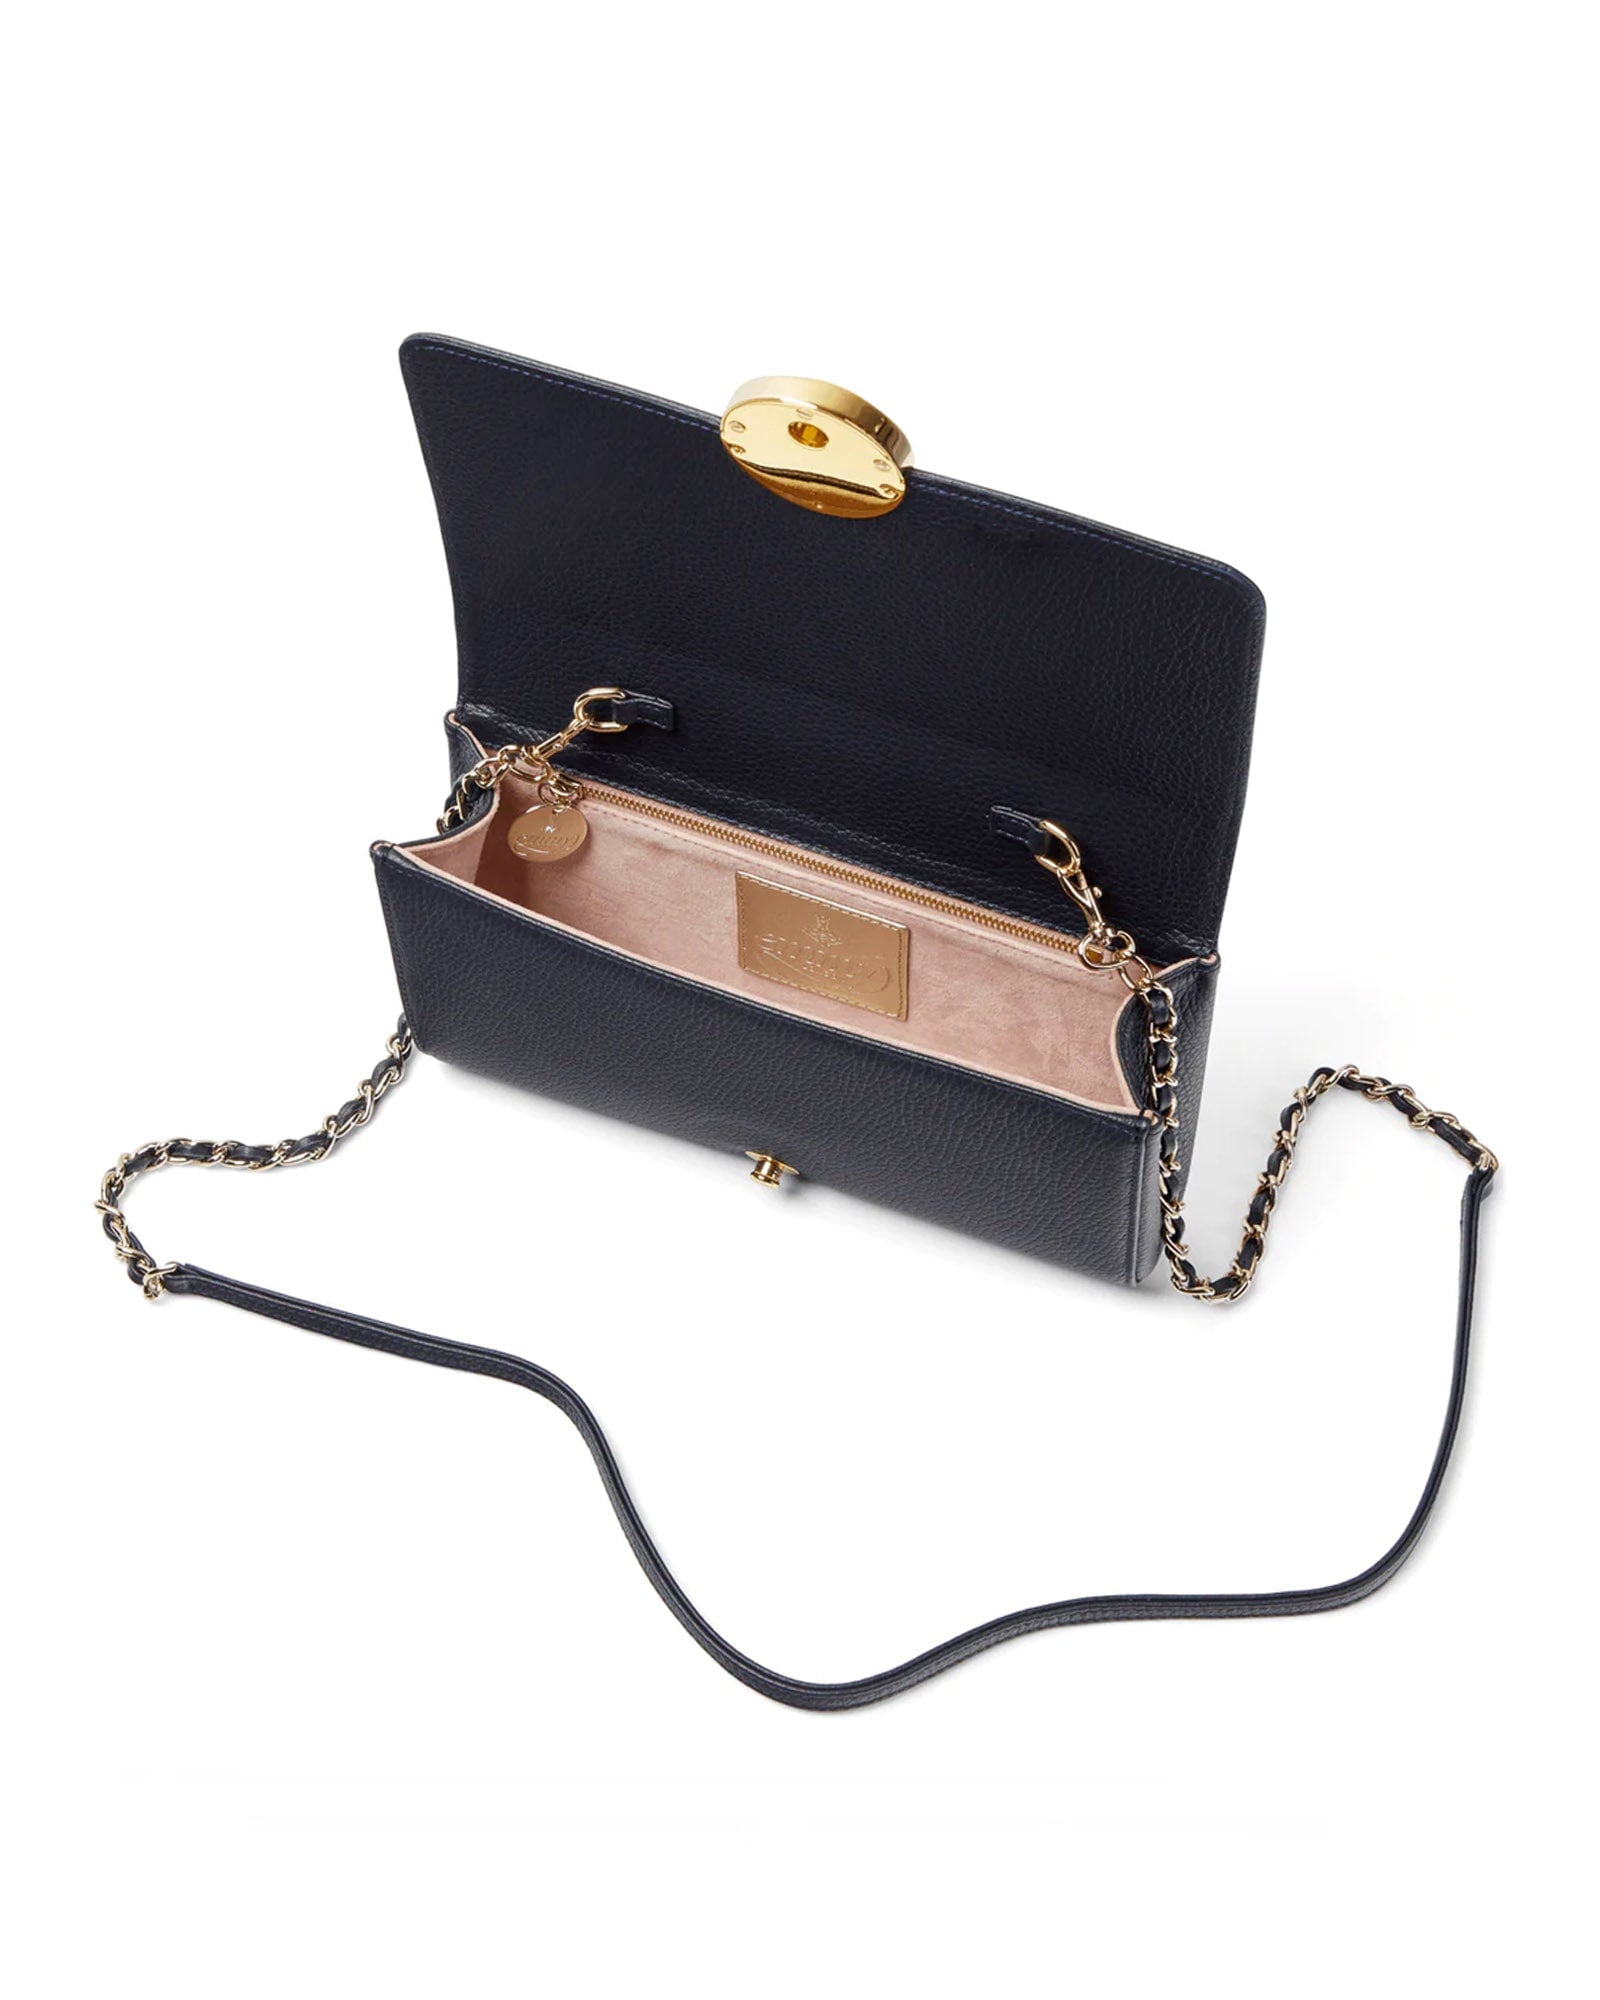 Naomi Textured Dark Navy Leather Occasion Bag Leather Clutch Bag  image